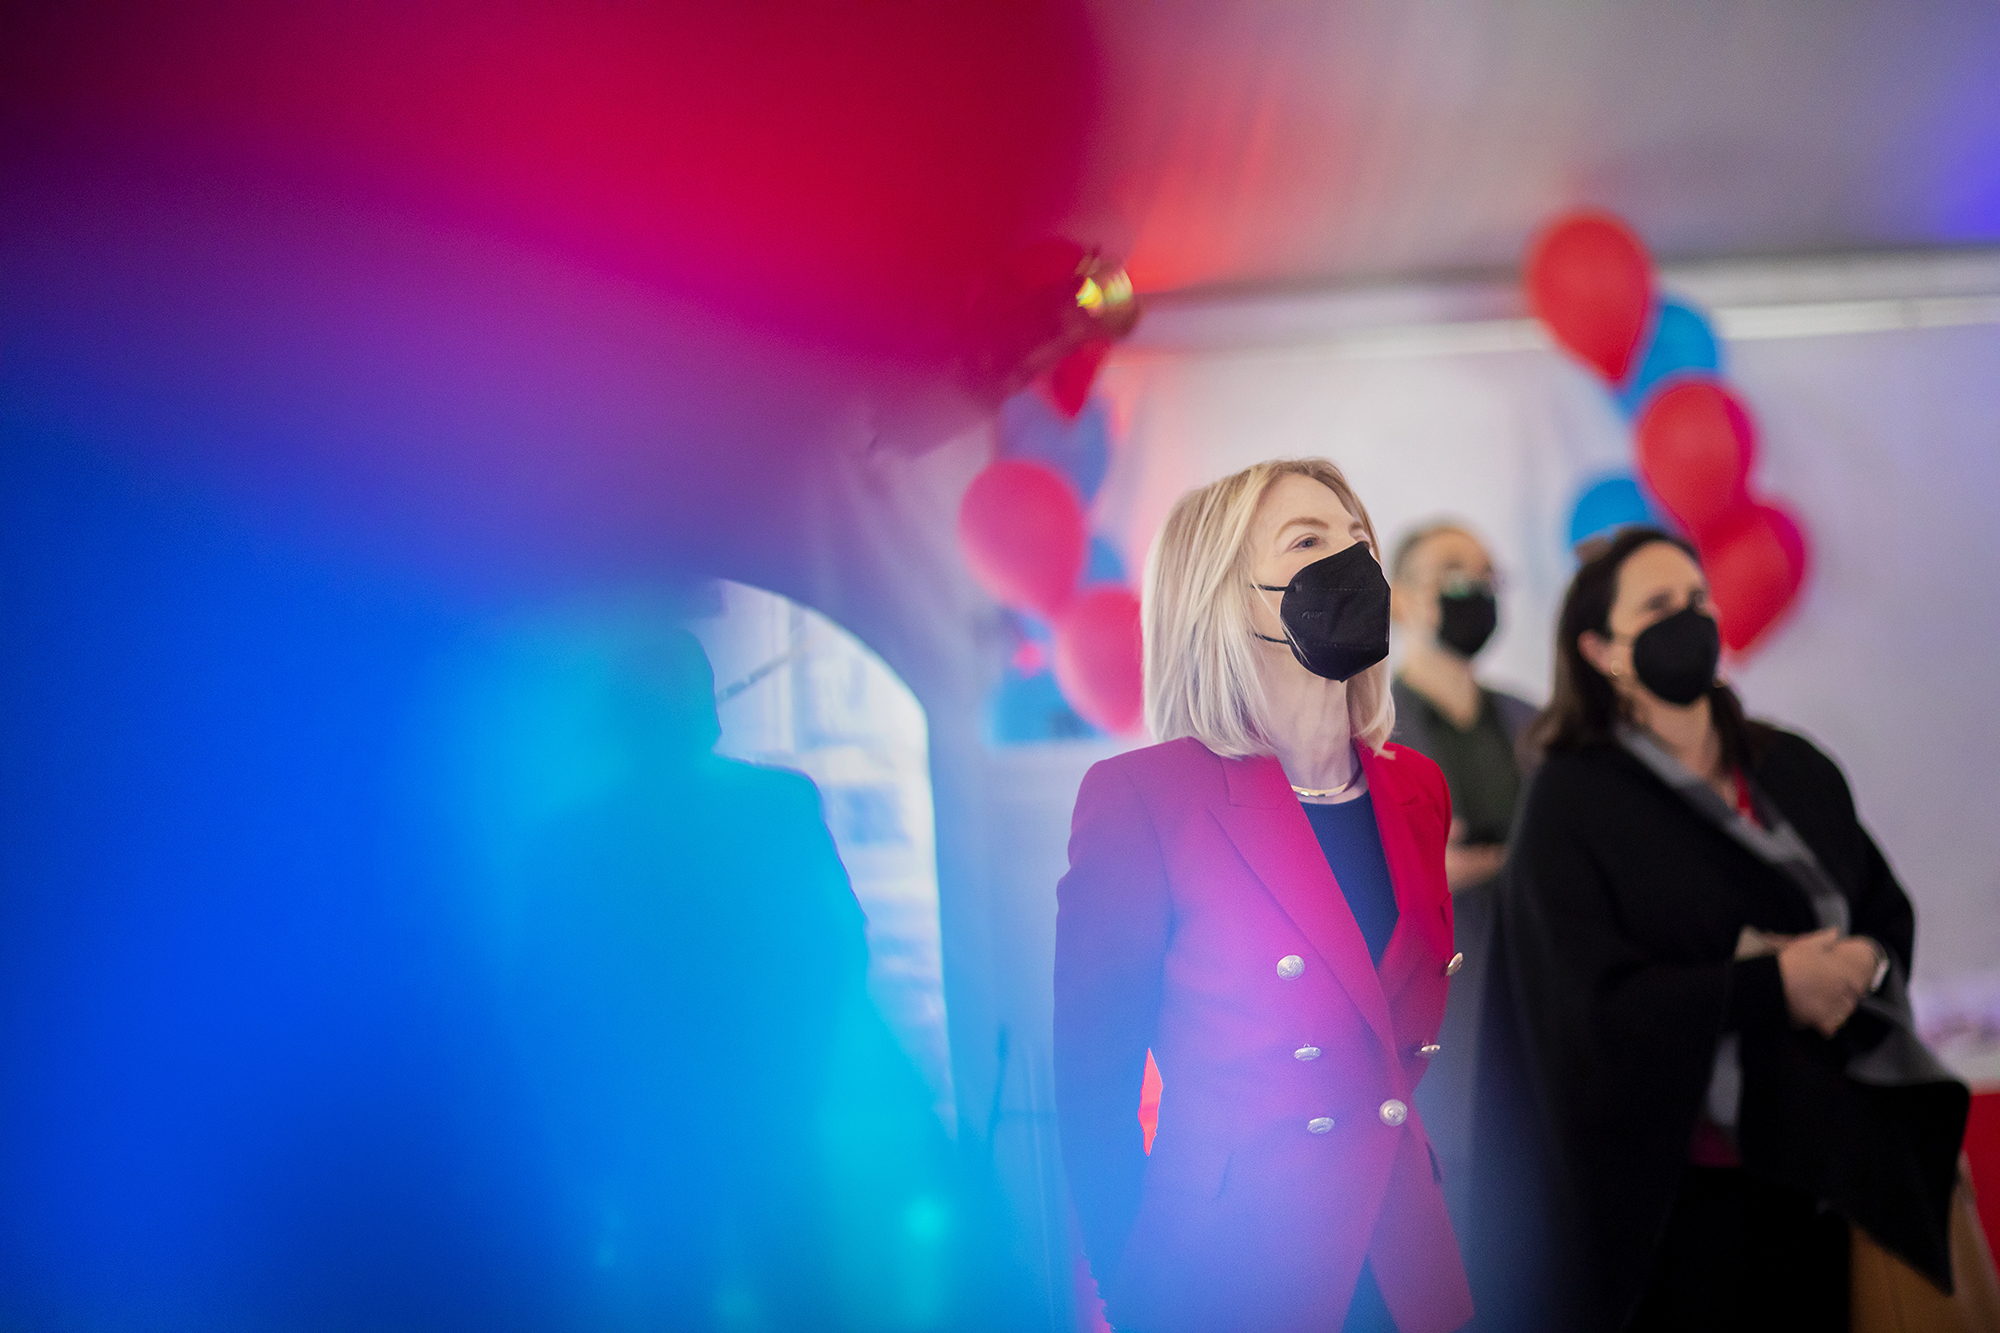 Penn President Amy Gutmann stands in a room surrounded by red and blue balloons.